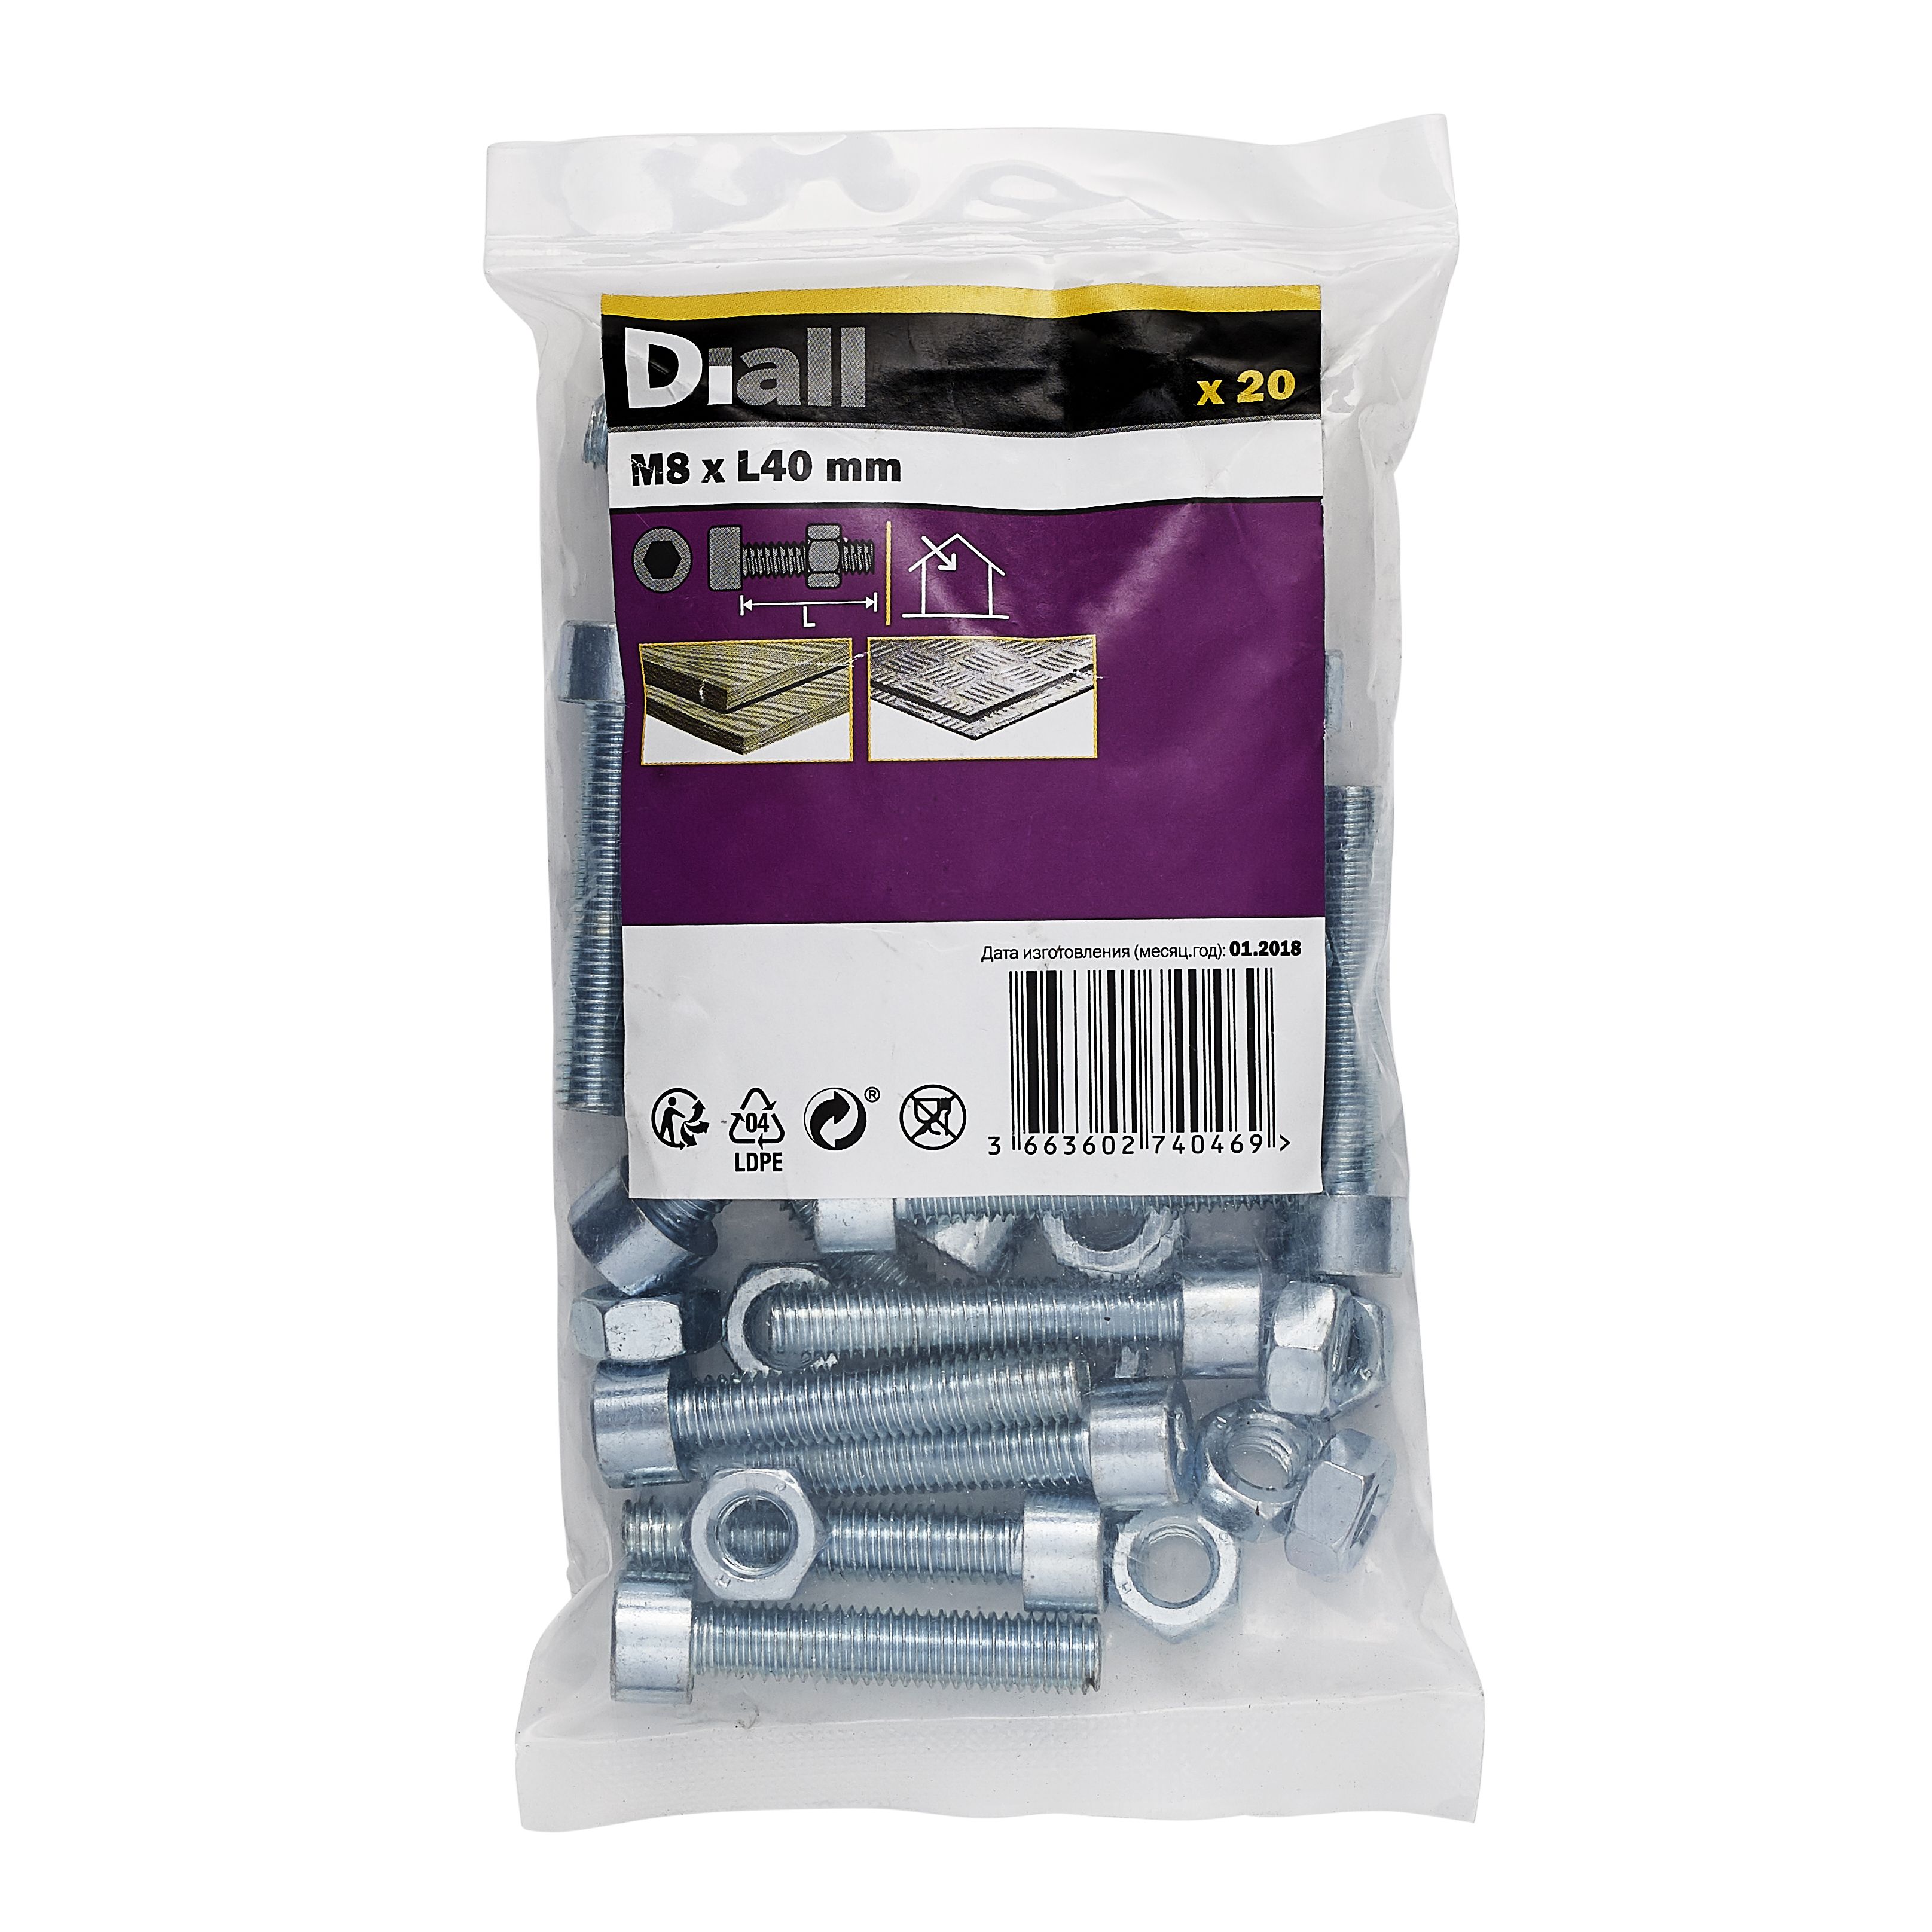 Diall M8 Cylindrical Zinc-plated Carbon steel Set screw & nut (Dia)8mm (L)40mm, Pack of 20